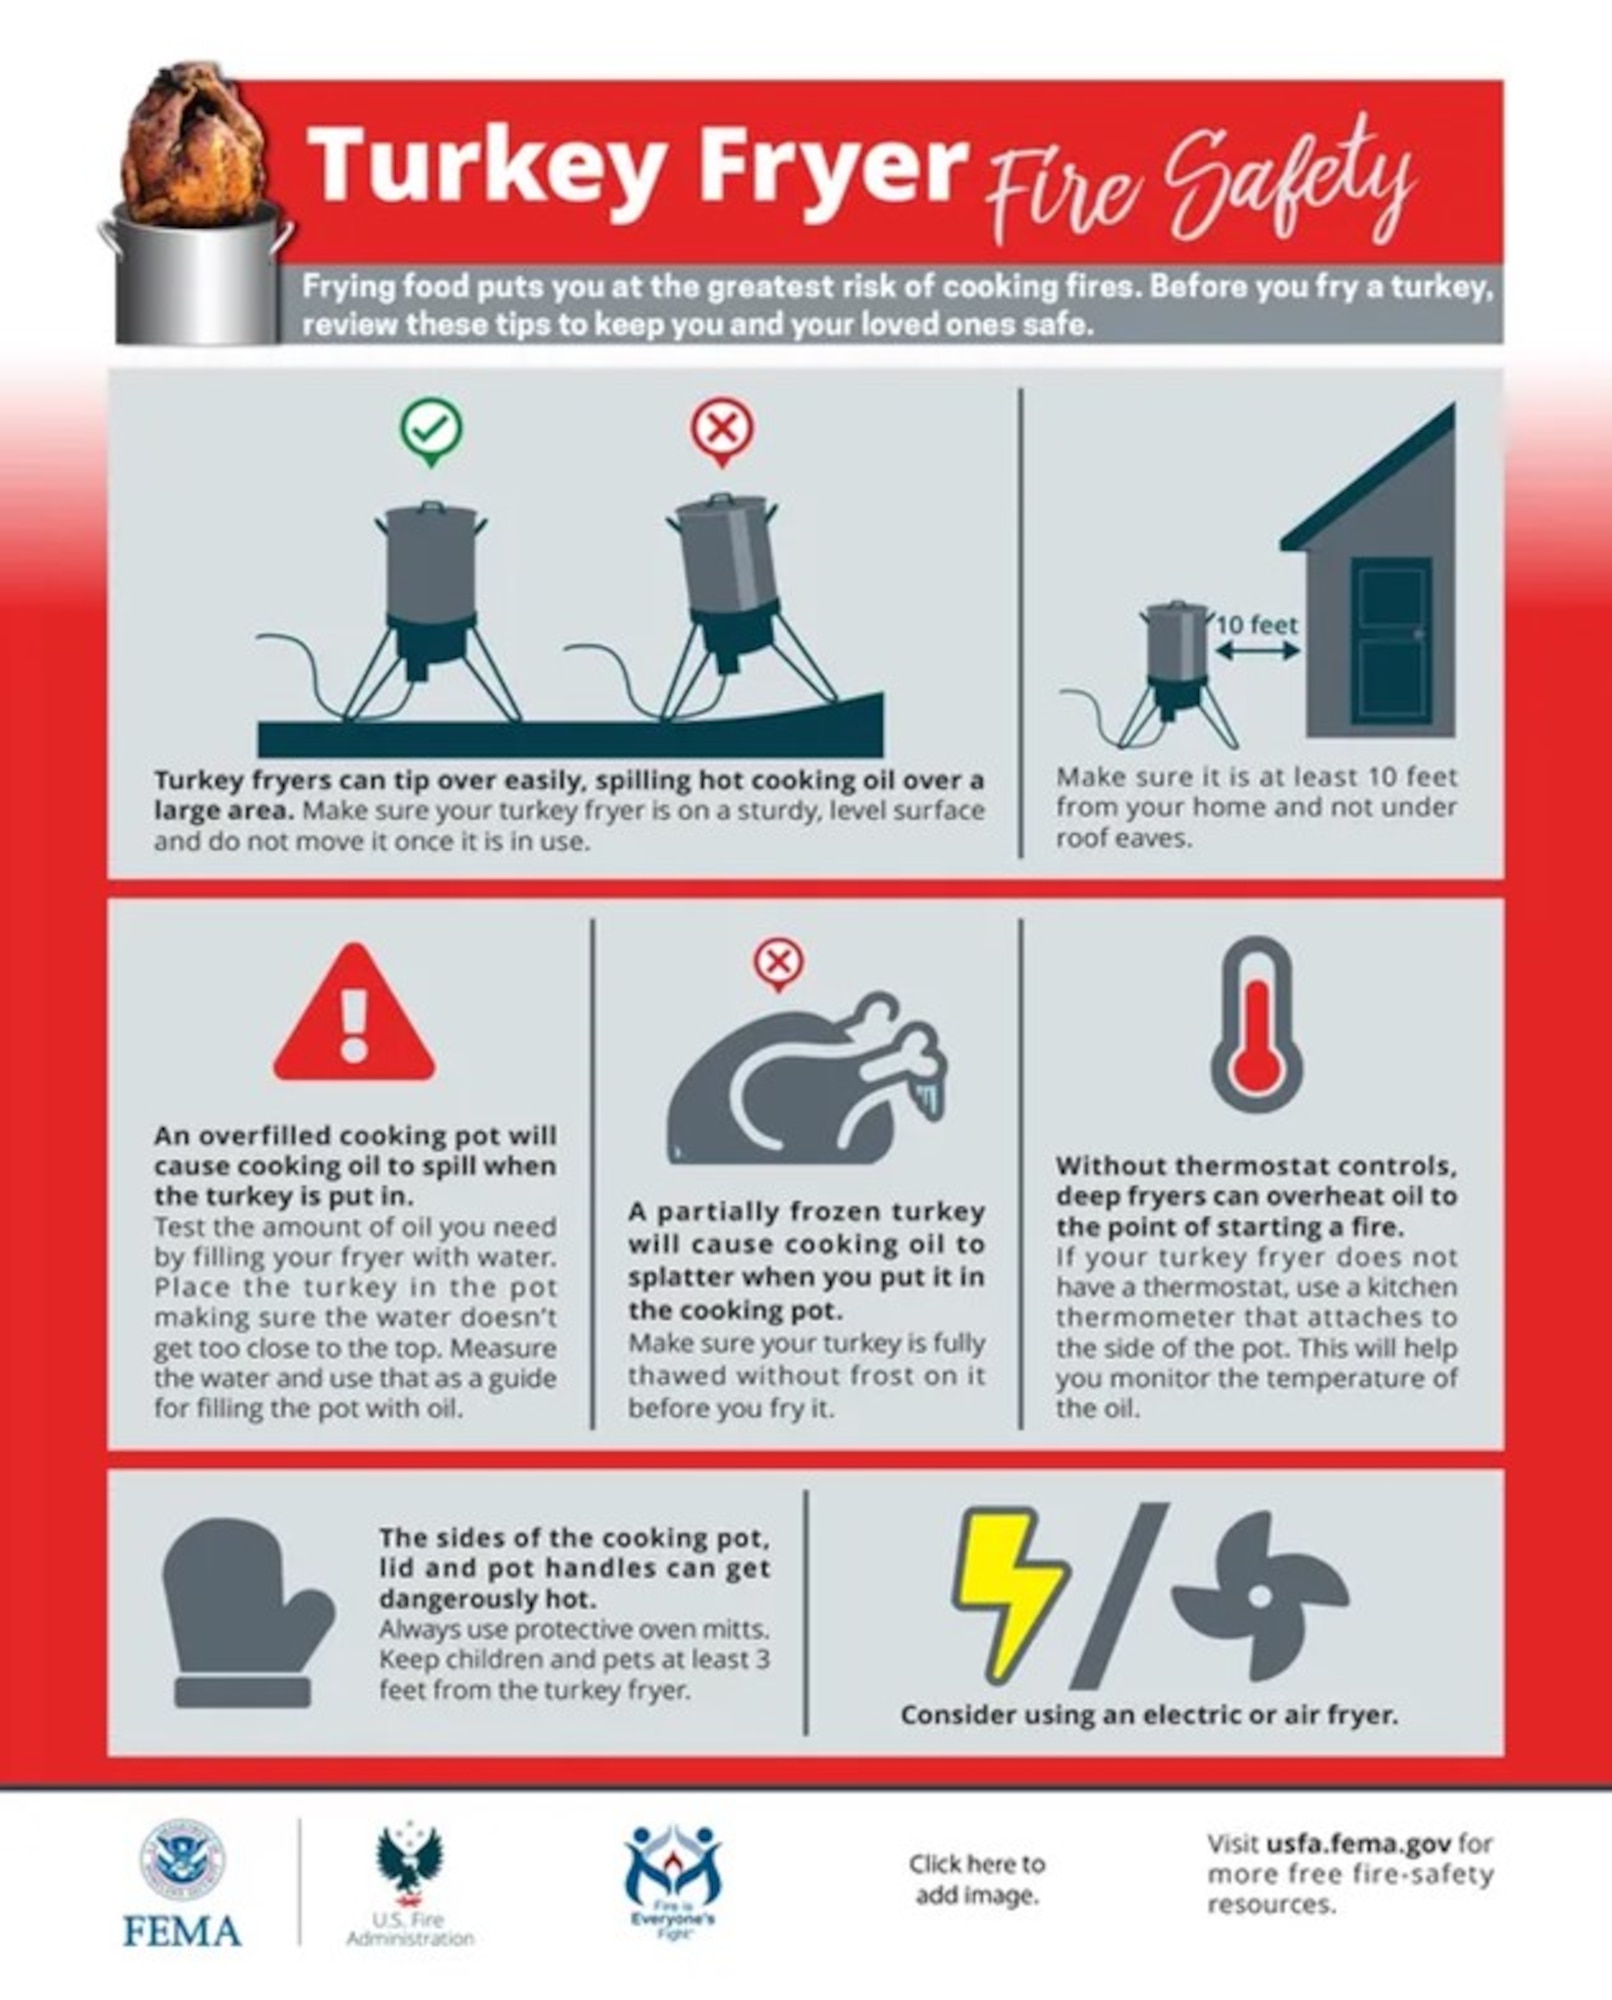 A graphic highlights tips for kitchen fire safety during the holiday season.